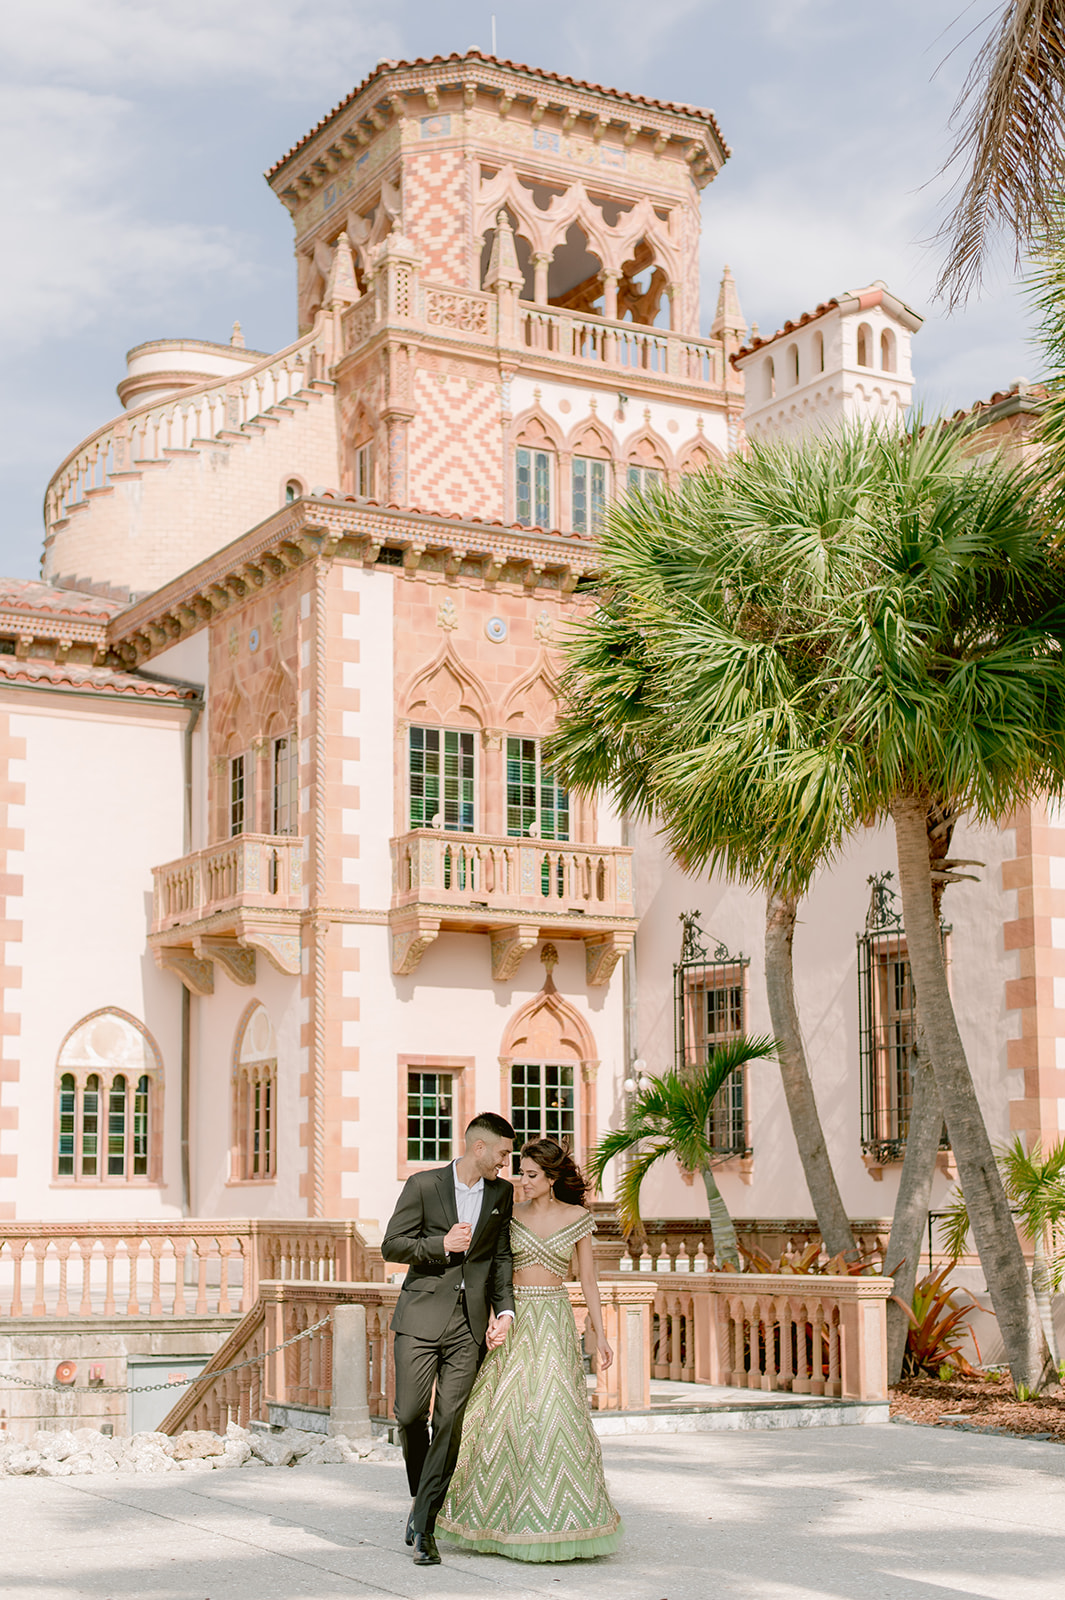 "Ringling Museum engagement shoot captures the elegance and beauty of Indian culture and love"
